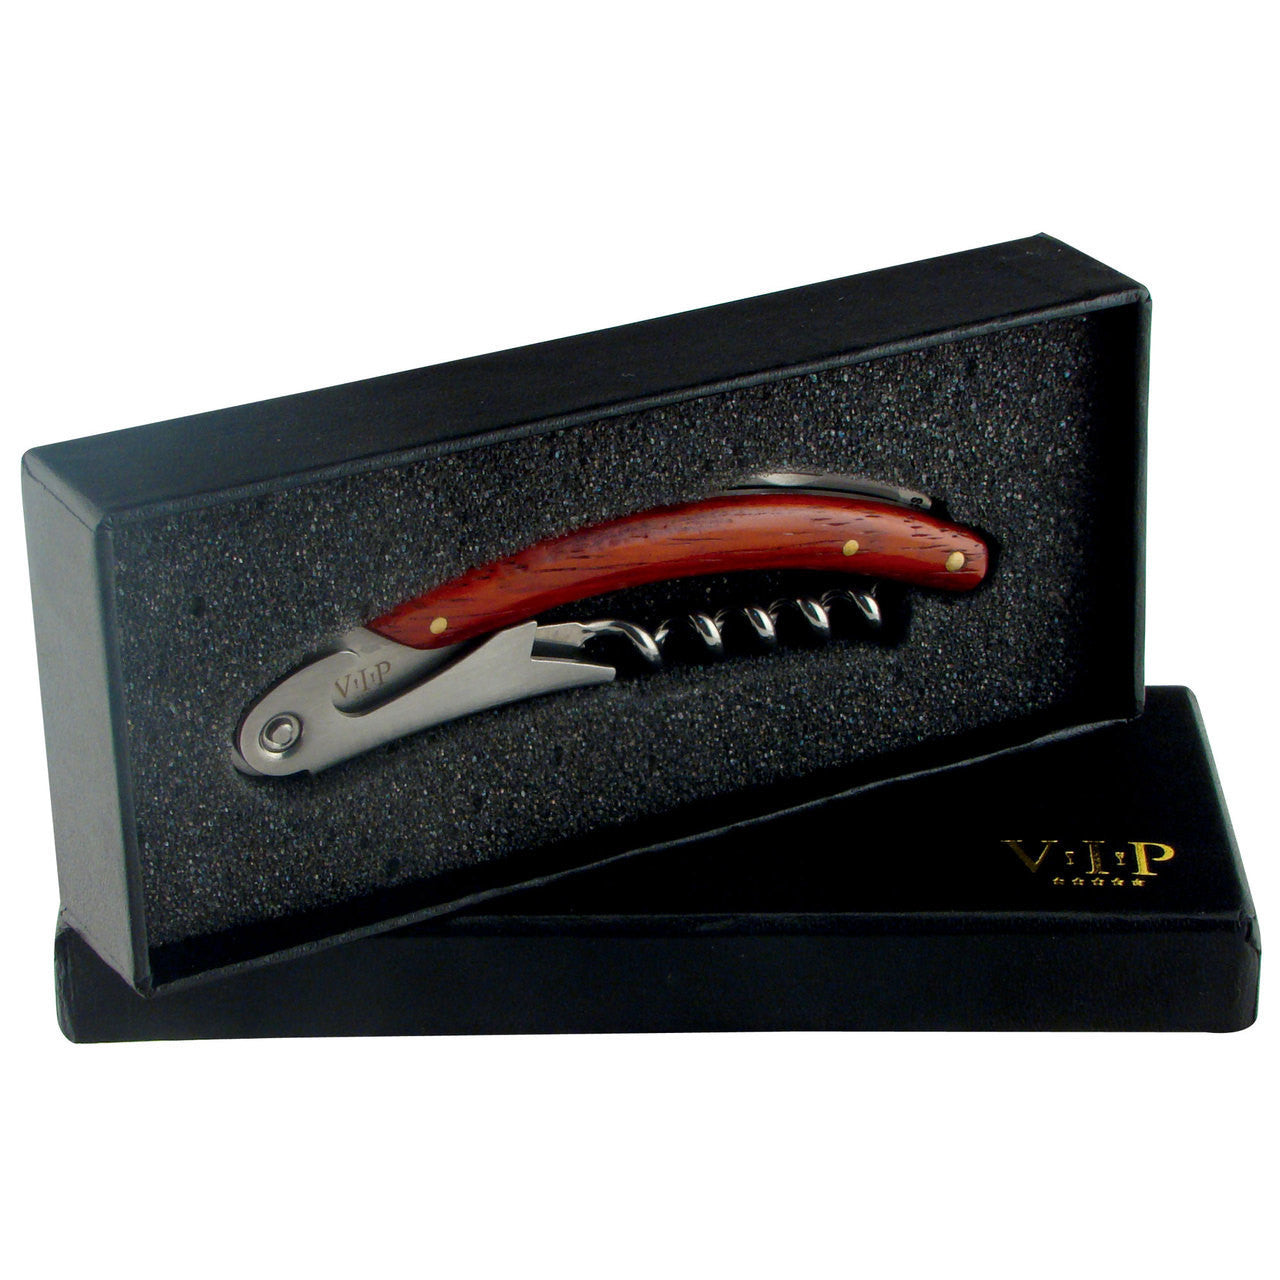 Stainless Steel Wine Corkscrew With Wood Handles in Gift Box - Humidors Wholesaler